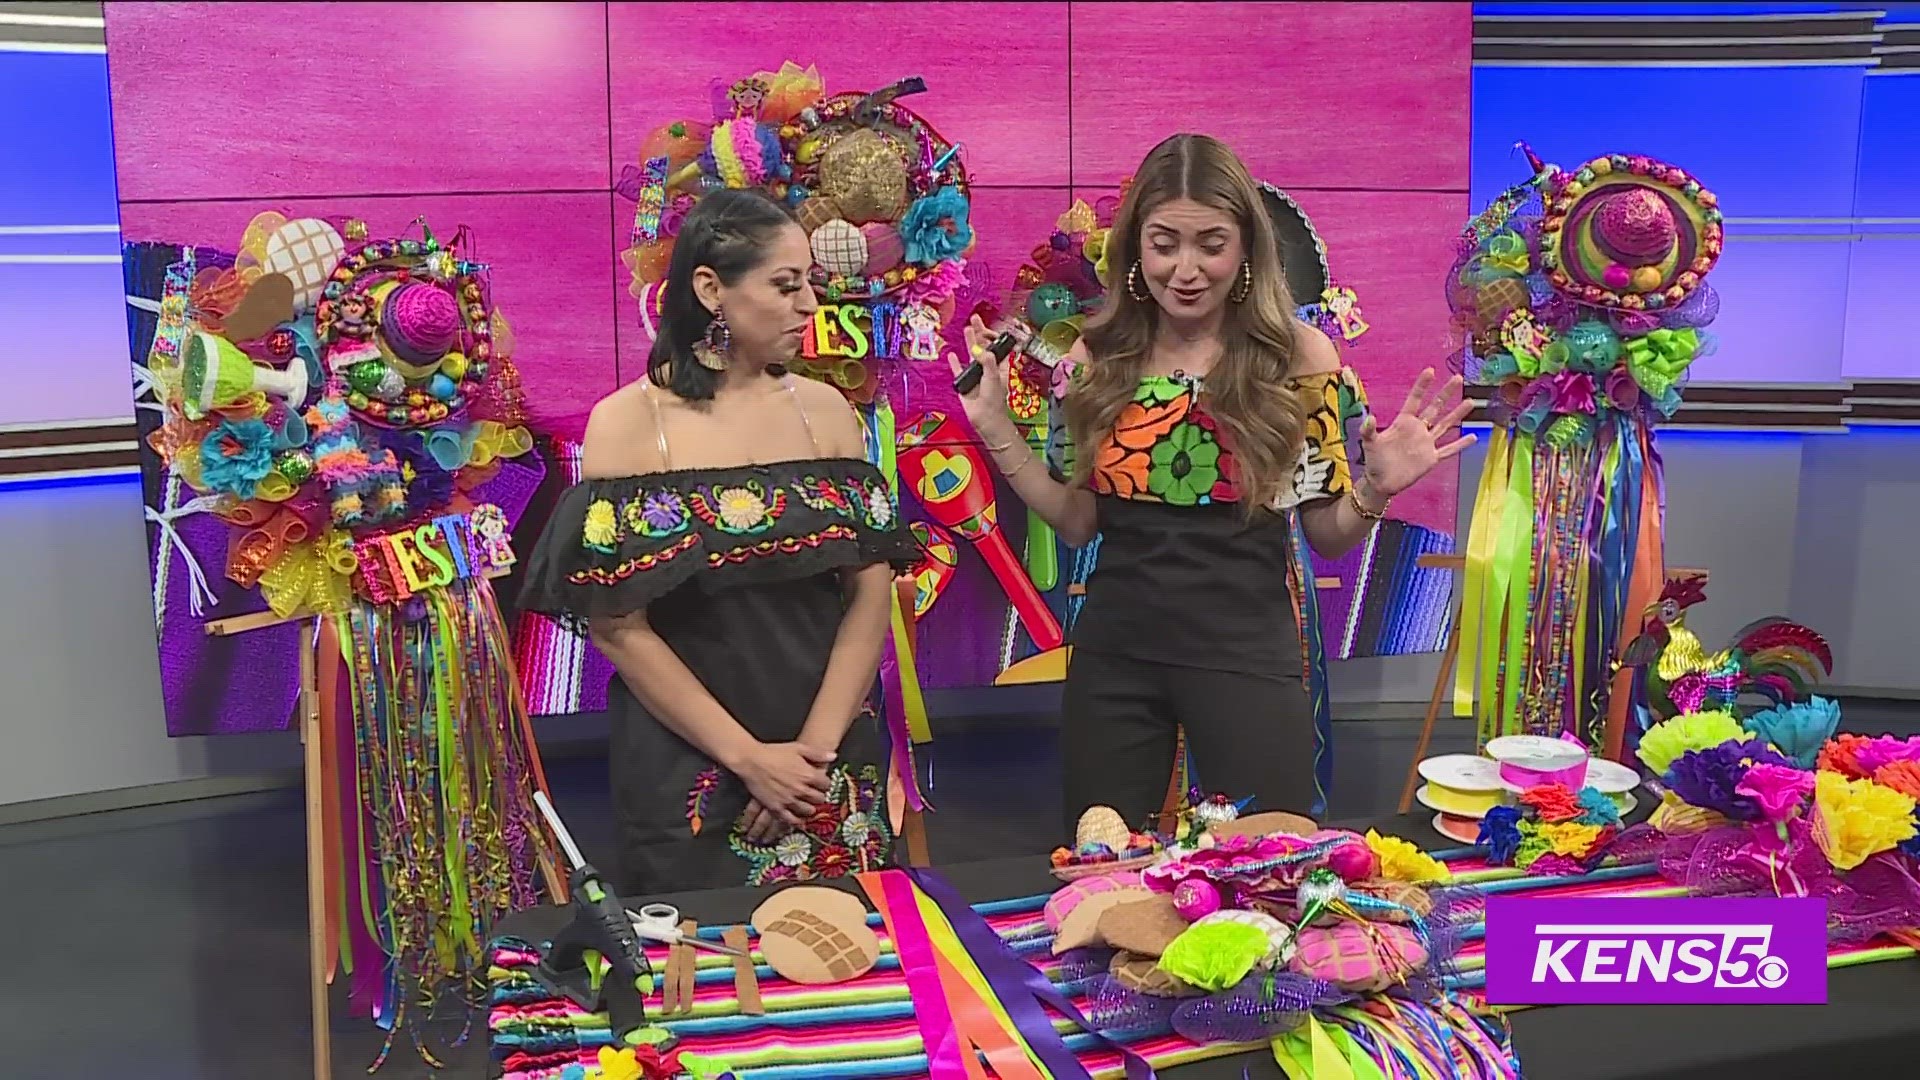 Genesis Olivares with The Little Craftymaid shows Roma how to make a festive Fiesta wreath.